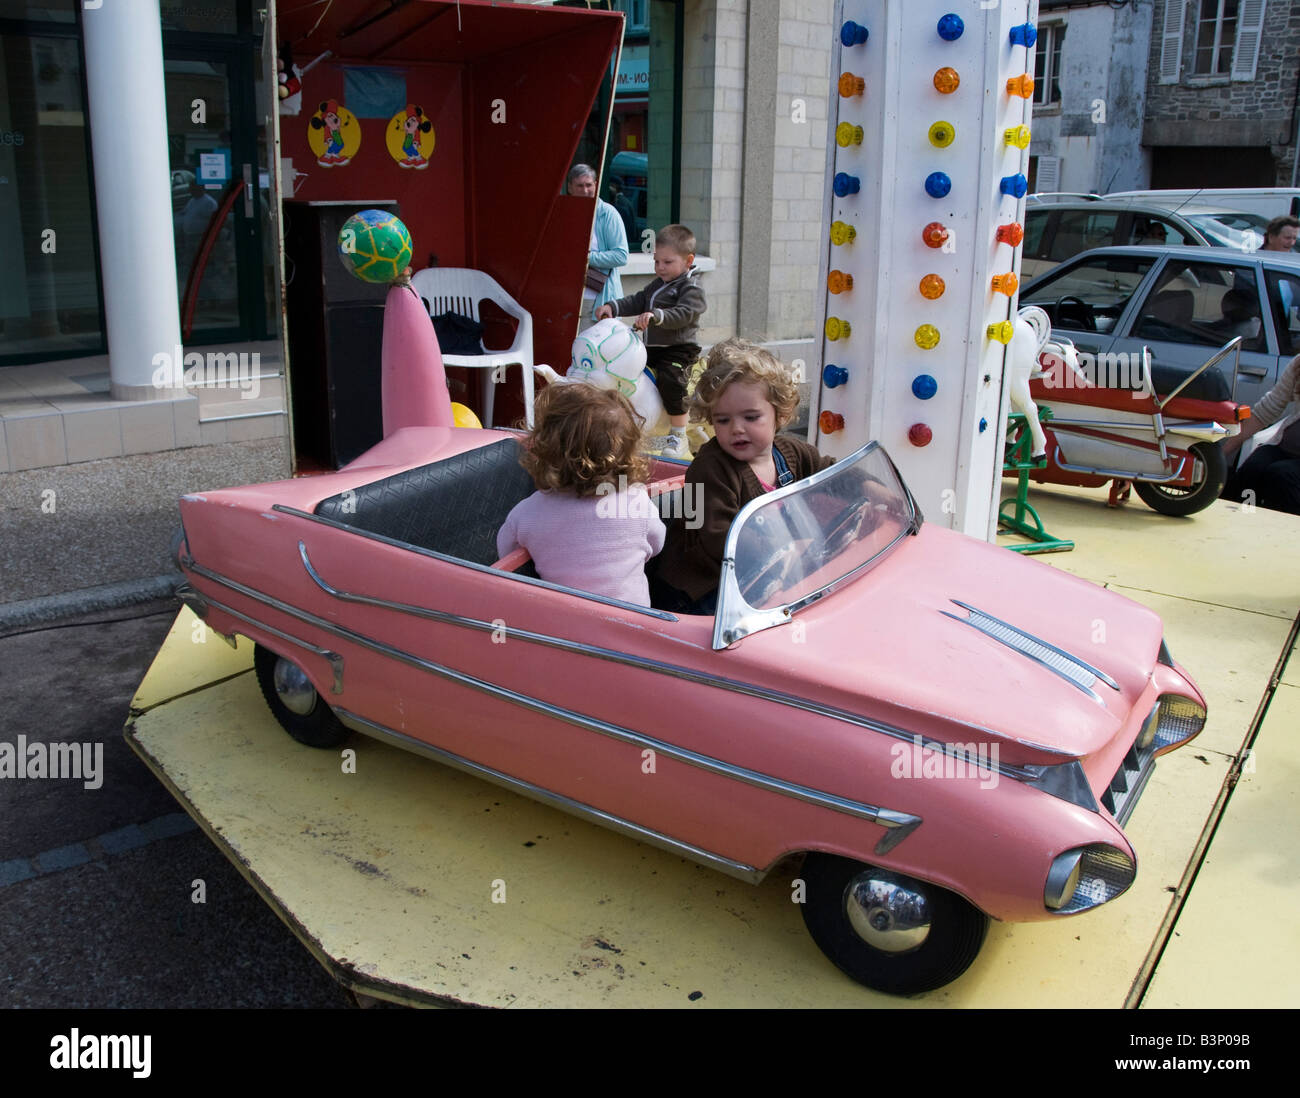 Barneville, Normandy, France. Two little girls in a pink model Cadillac on a merry go round (carousel) in the weekly market Stock Photo